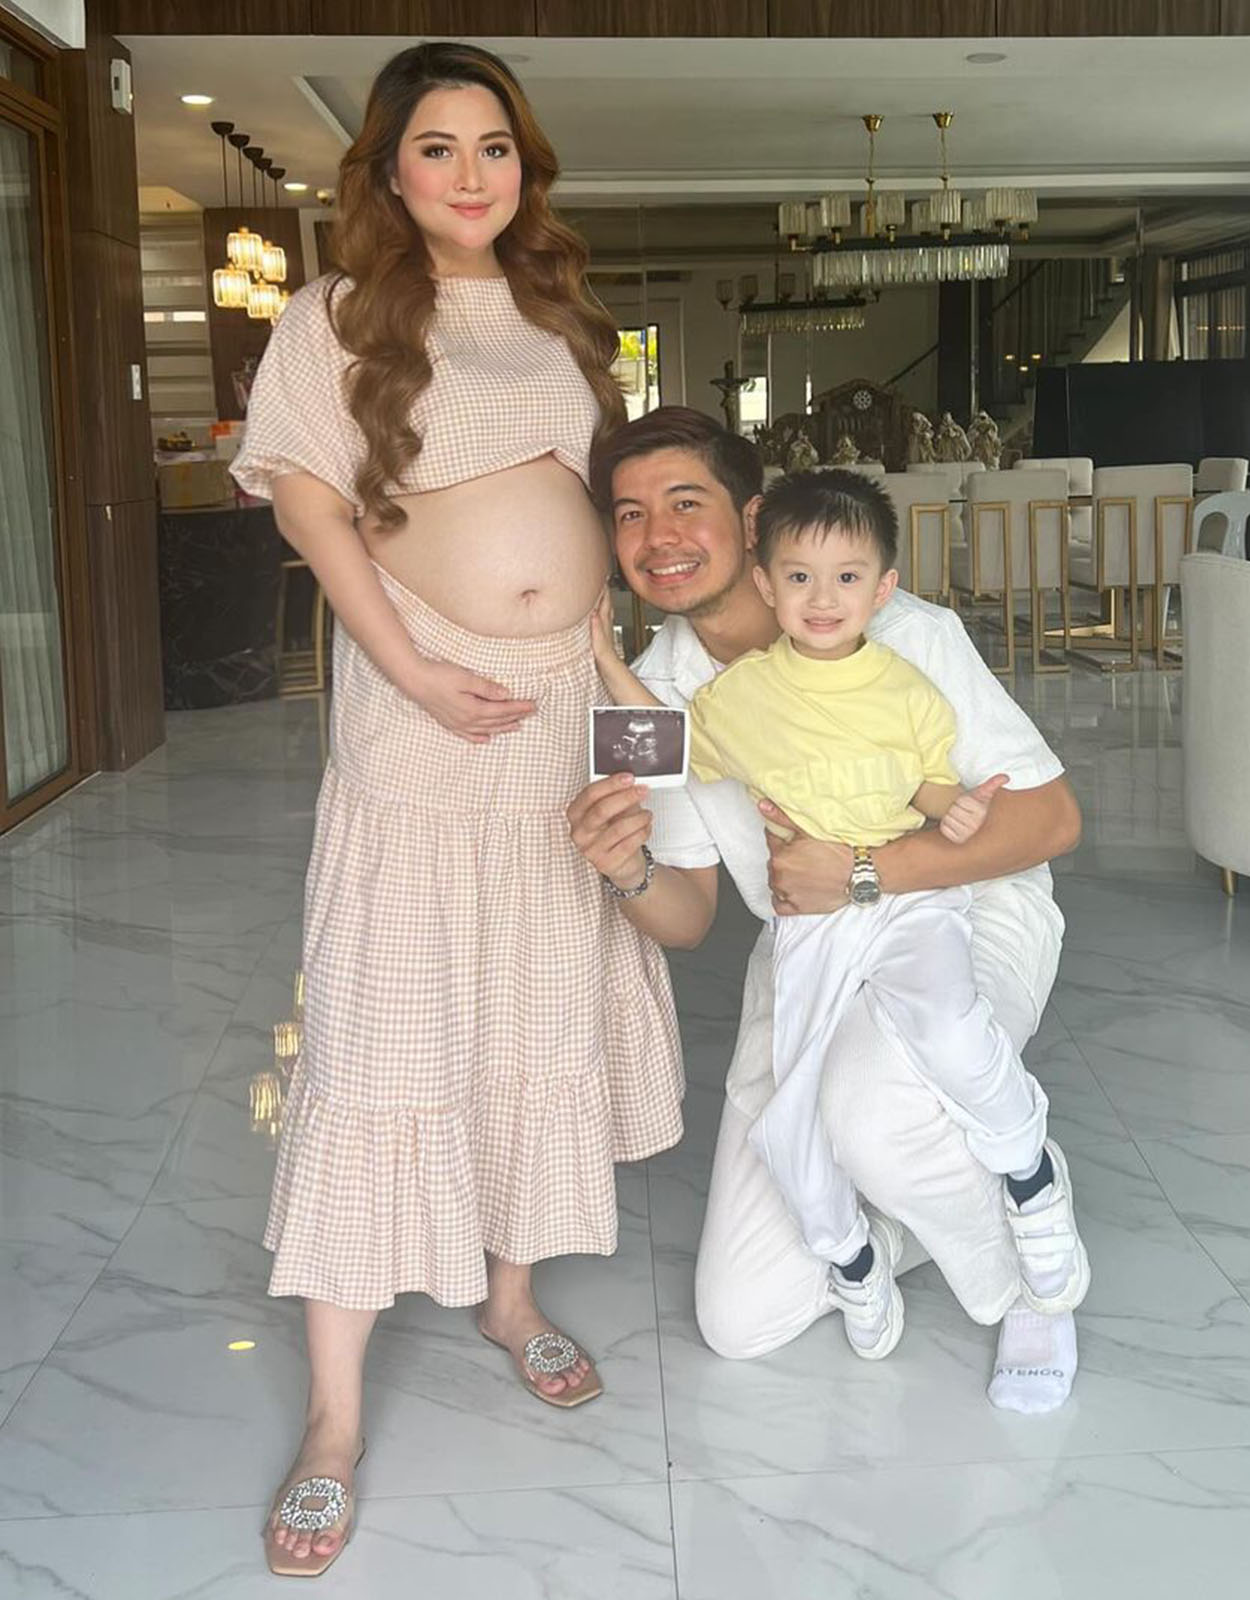 Rodjun Cruz and Dianne Medina are Expecting Baby Number Two!